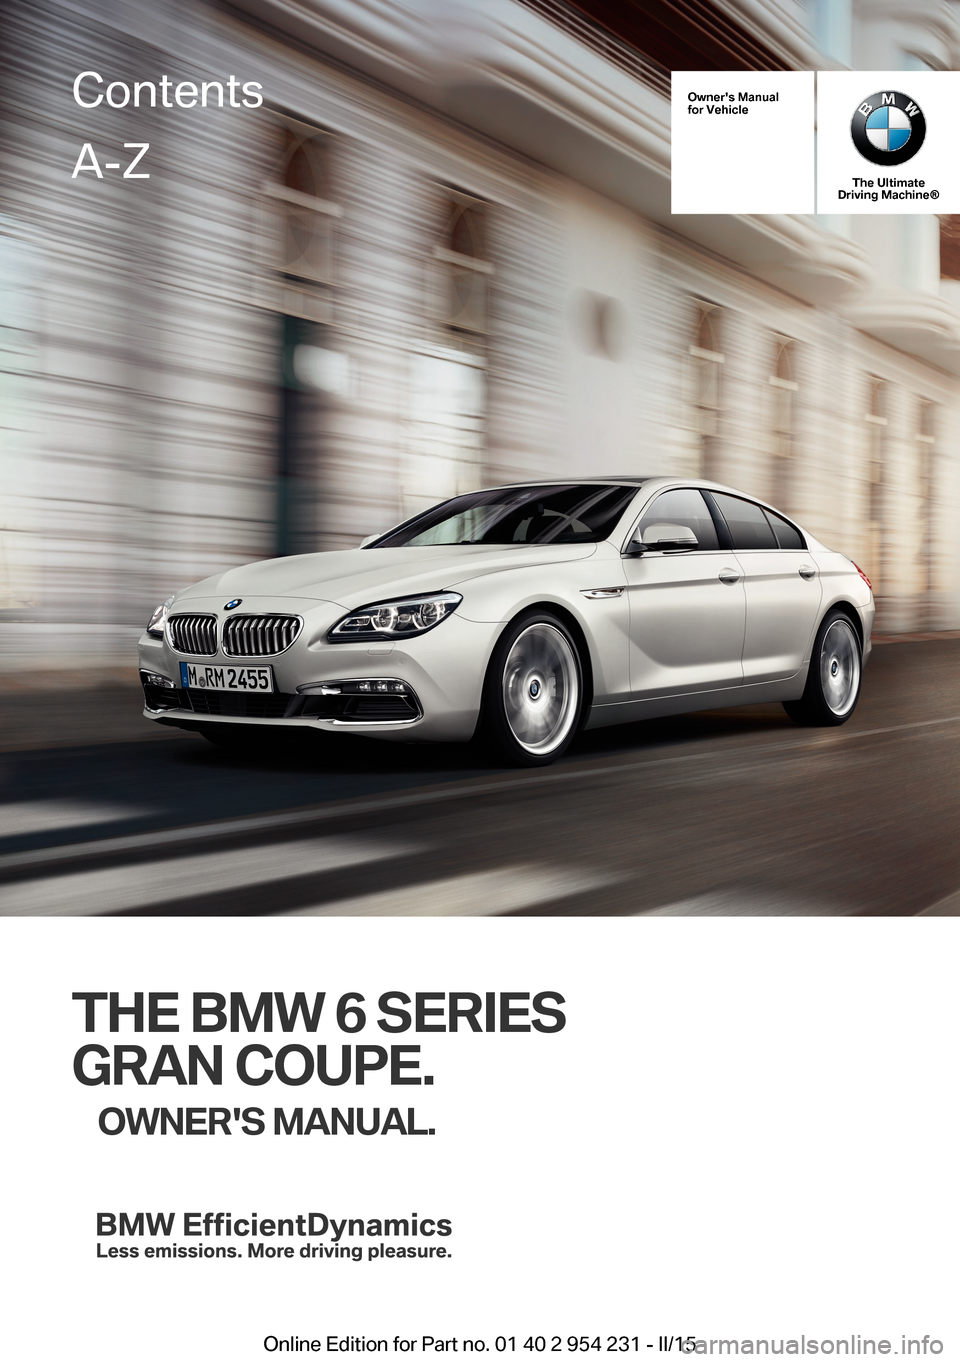 BMW 6 SERIES GRAN COUPE 2015 F06 Owners Manual Owners Manualfor Vehicle
The UltimateDriving Machine®
THE BMW 6 SERIES
GRAN COUPE.
OWNERS MANUAL.
ContentsA-Z
Online Edition for Part no. 01 40 2 954 231 - II/15   